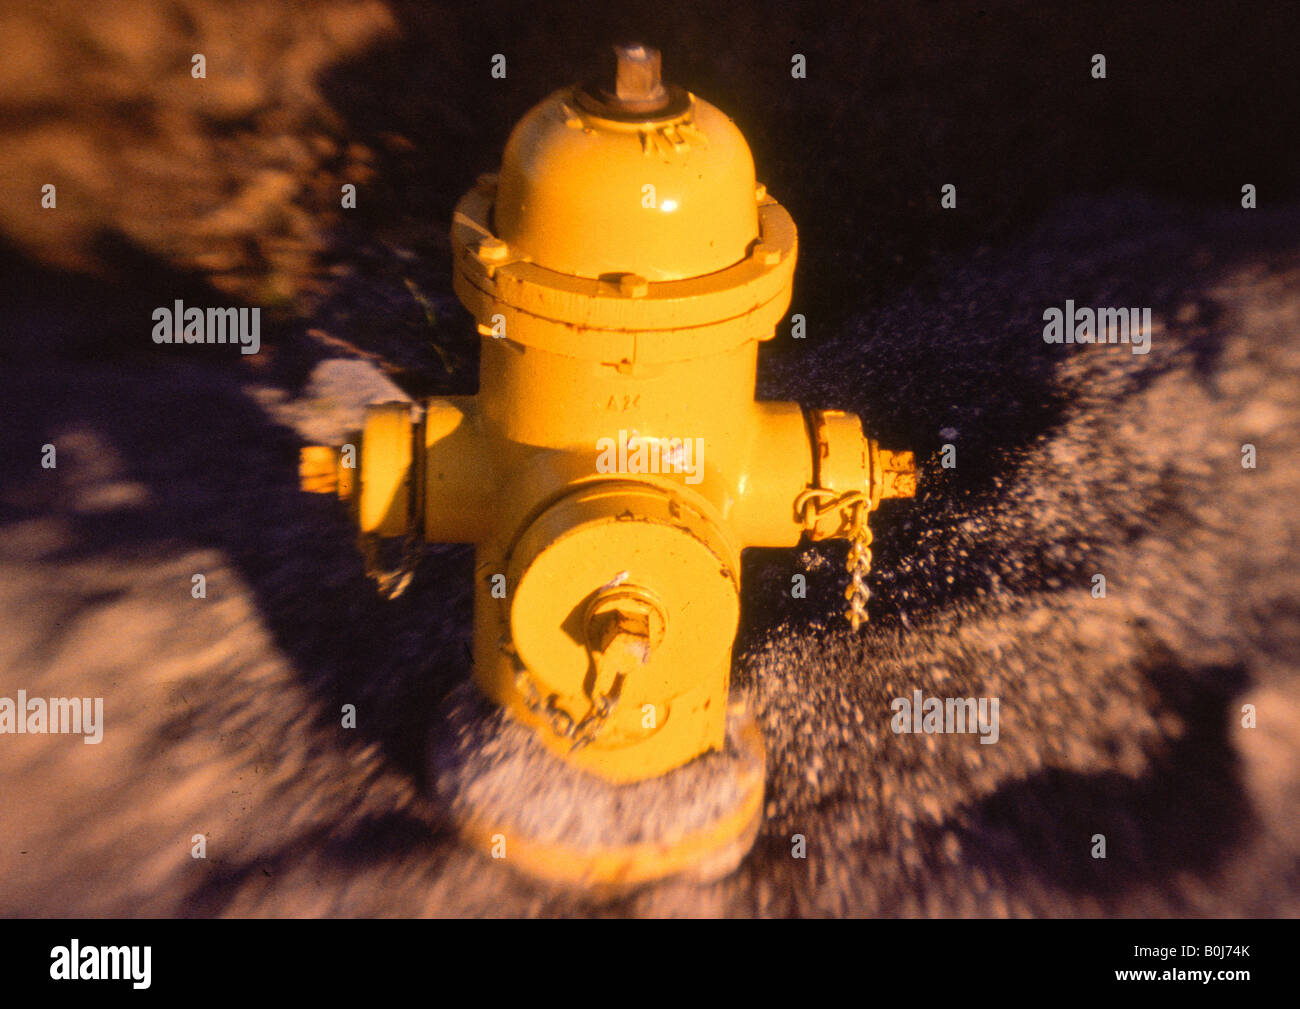 Bright yellow residential fire hydrant plug Stock Photo